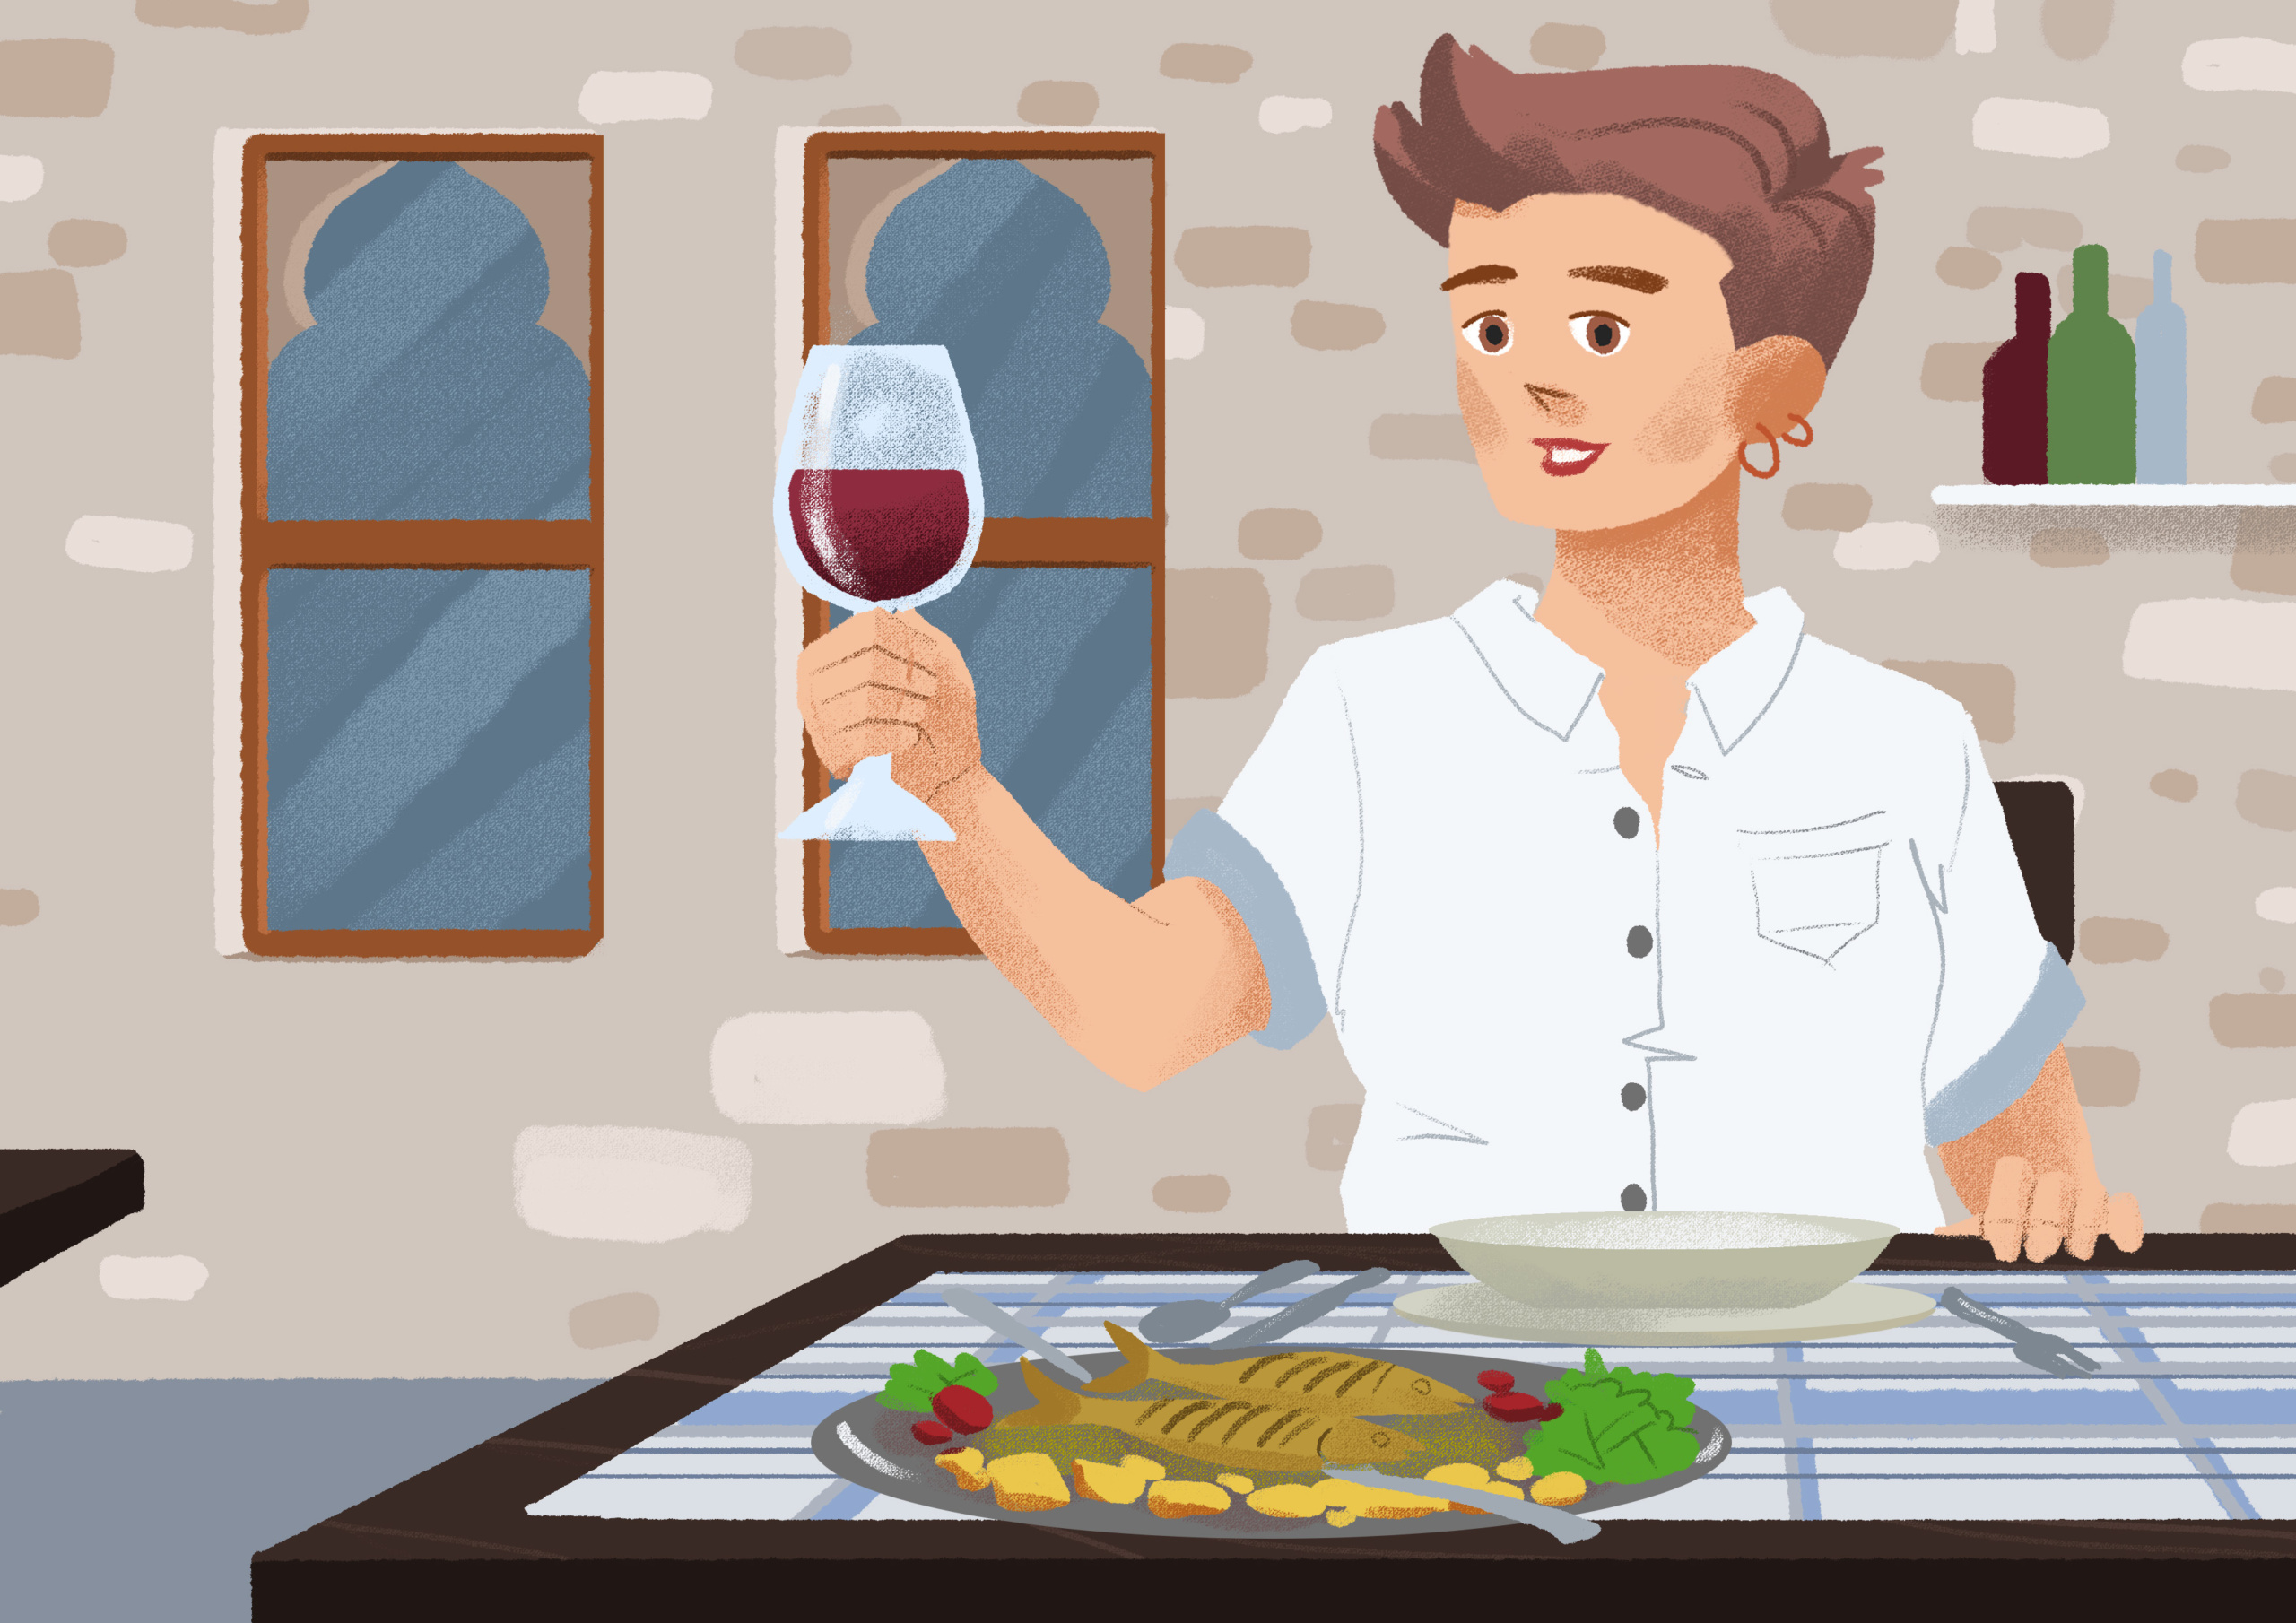 A woman sitting at a table holding up a wine glass with red wine with a soup plate in front of her. A plate with fish, potatoes, and greens is on the opposite side of the table.